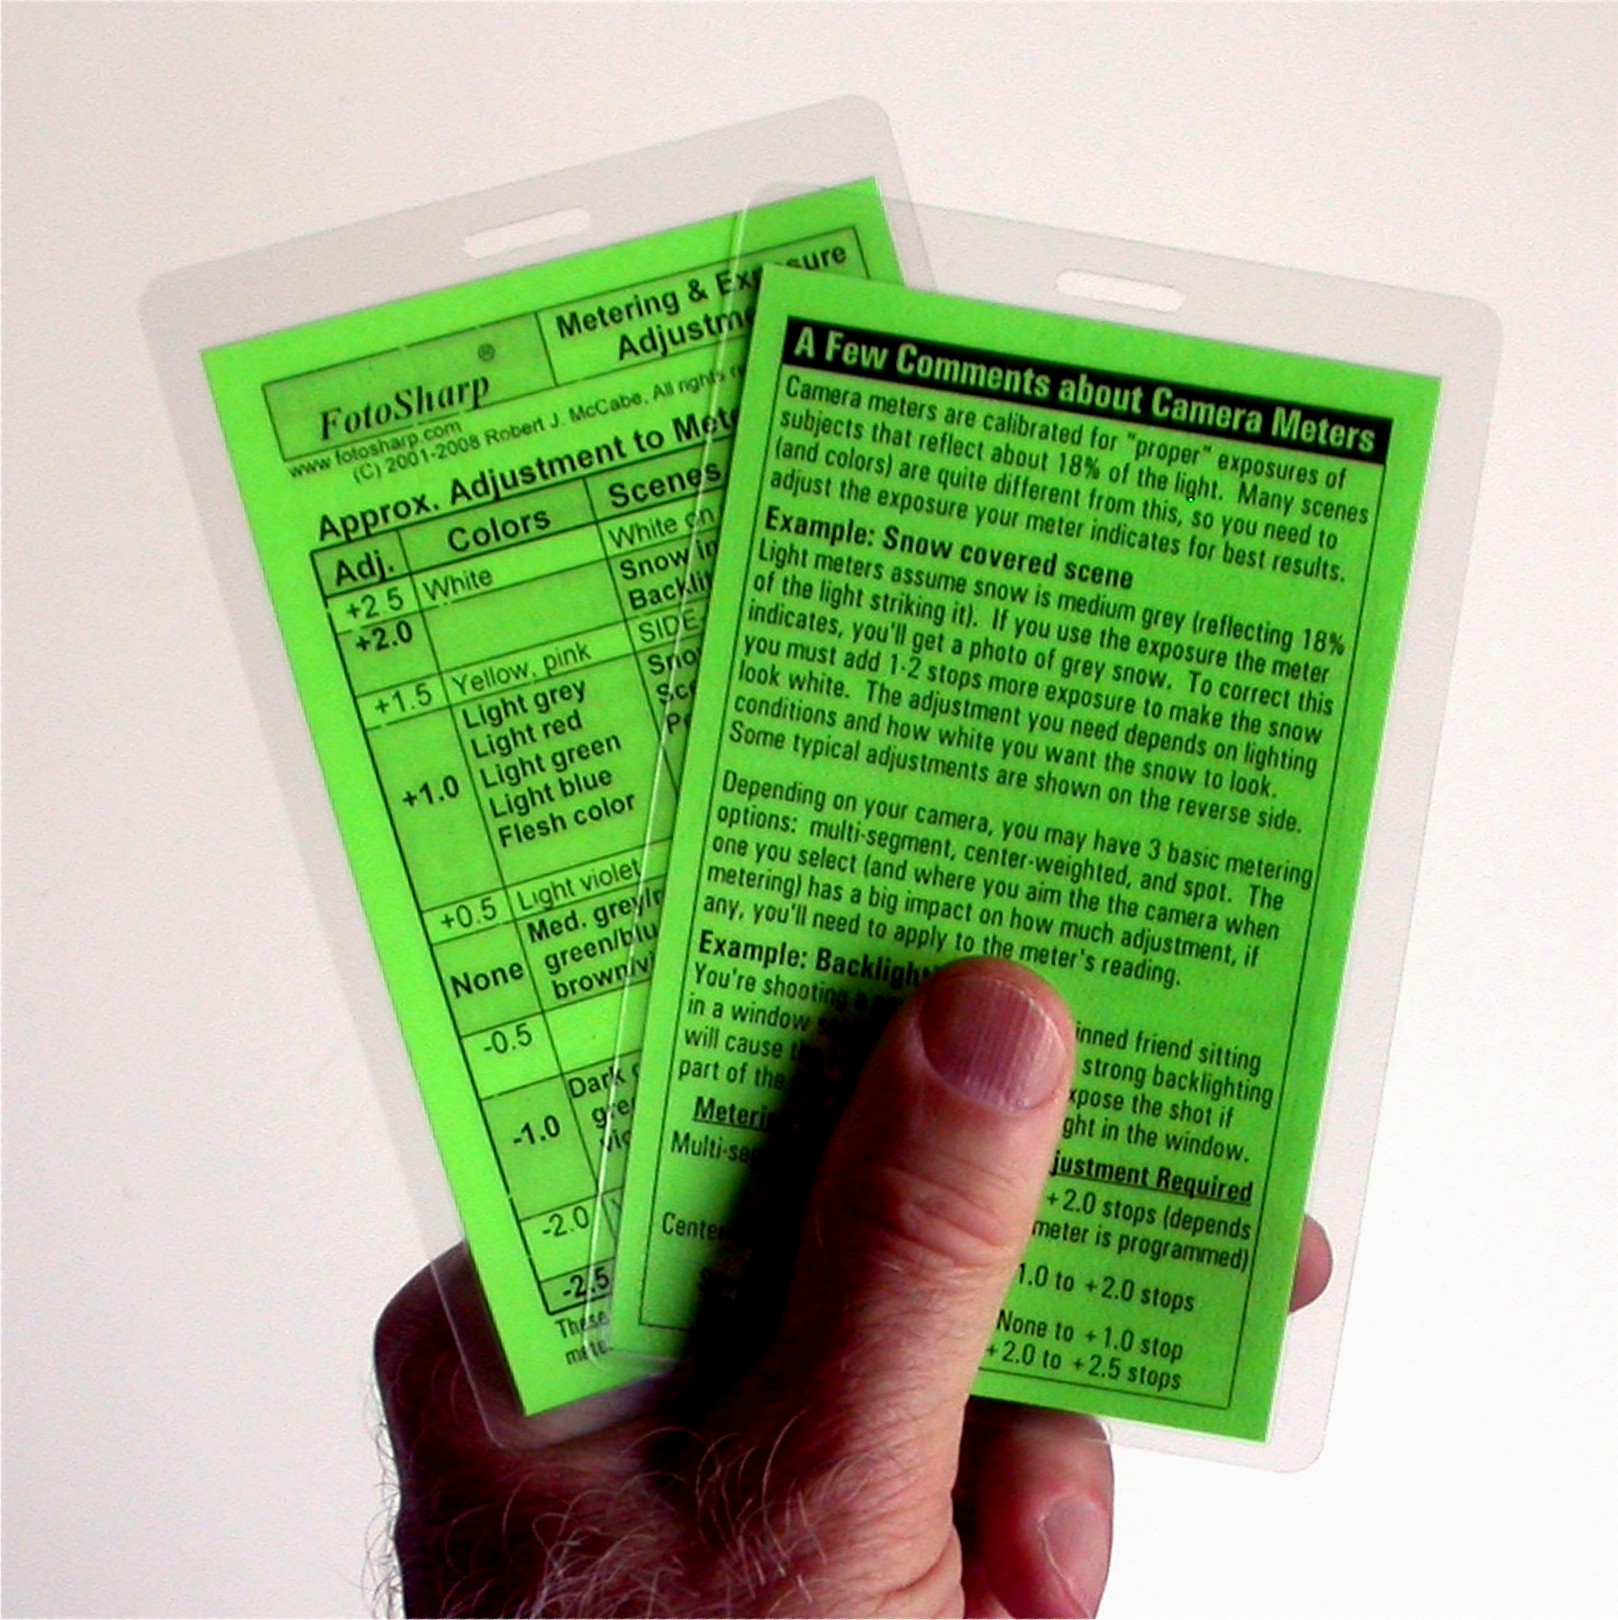 This is a low resolution image.
Our cards are printed on a
laser printer and are VERY
clear and easy to read.